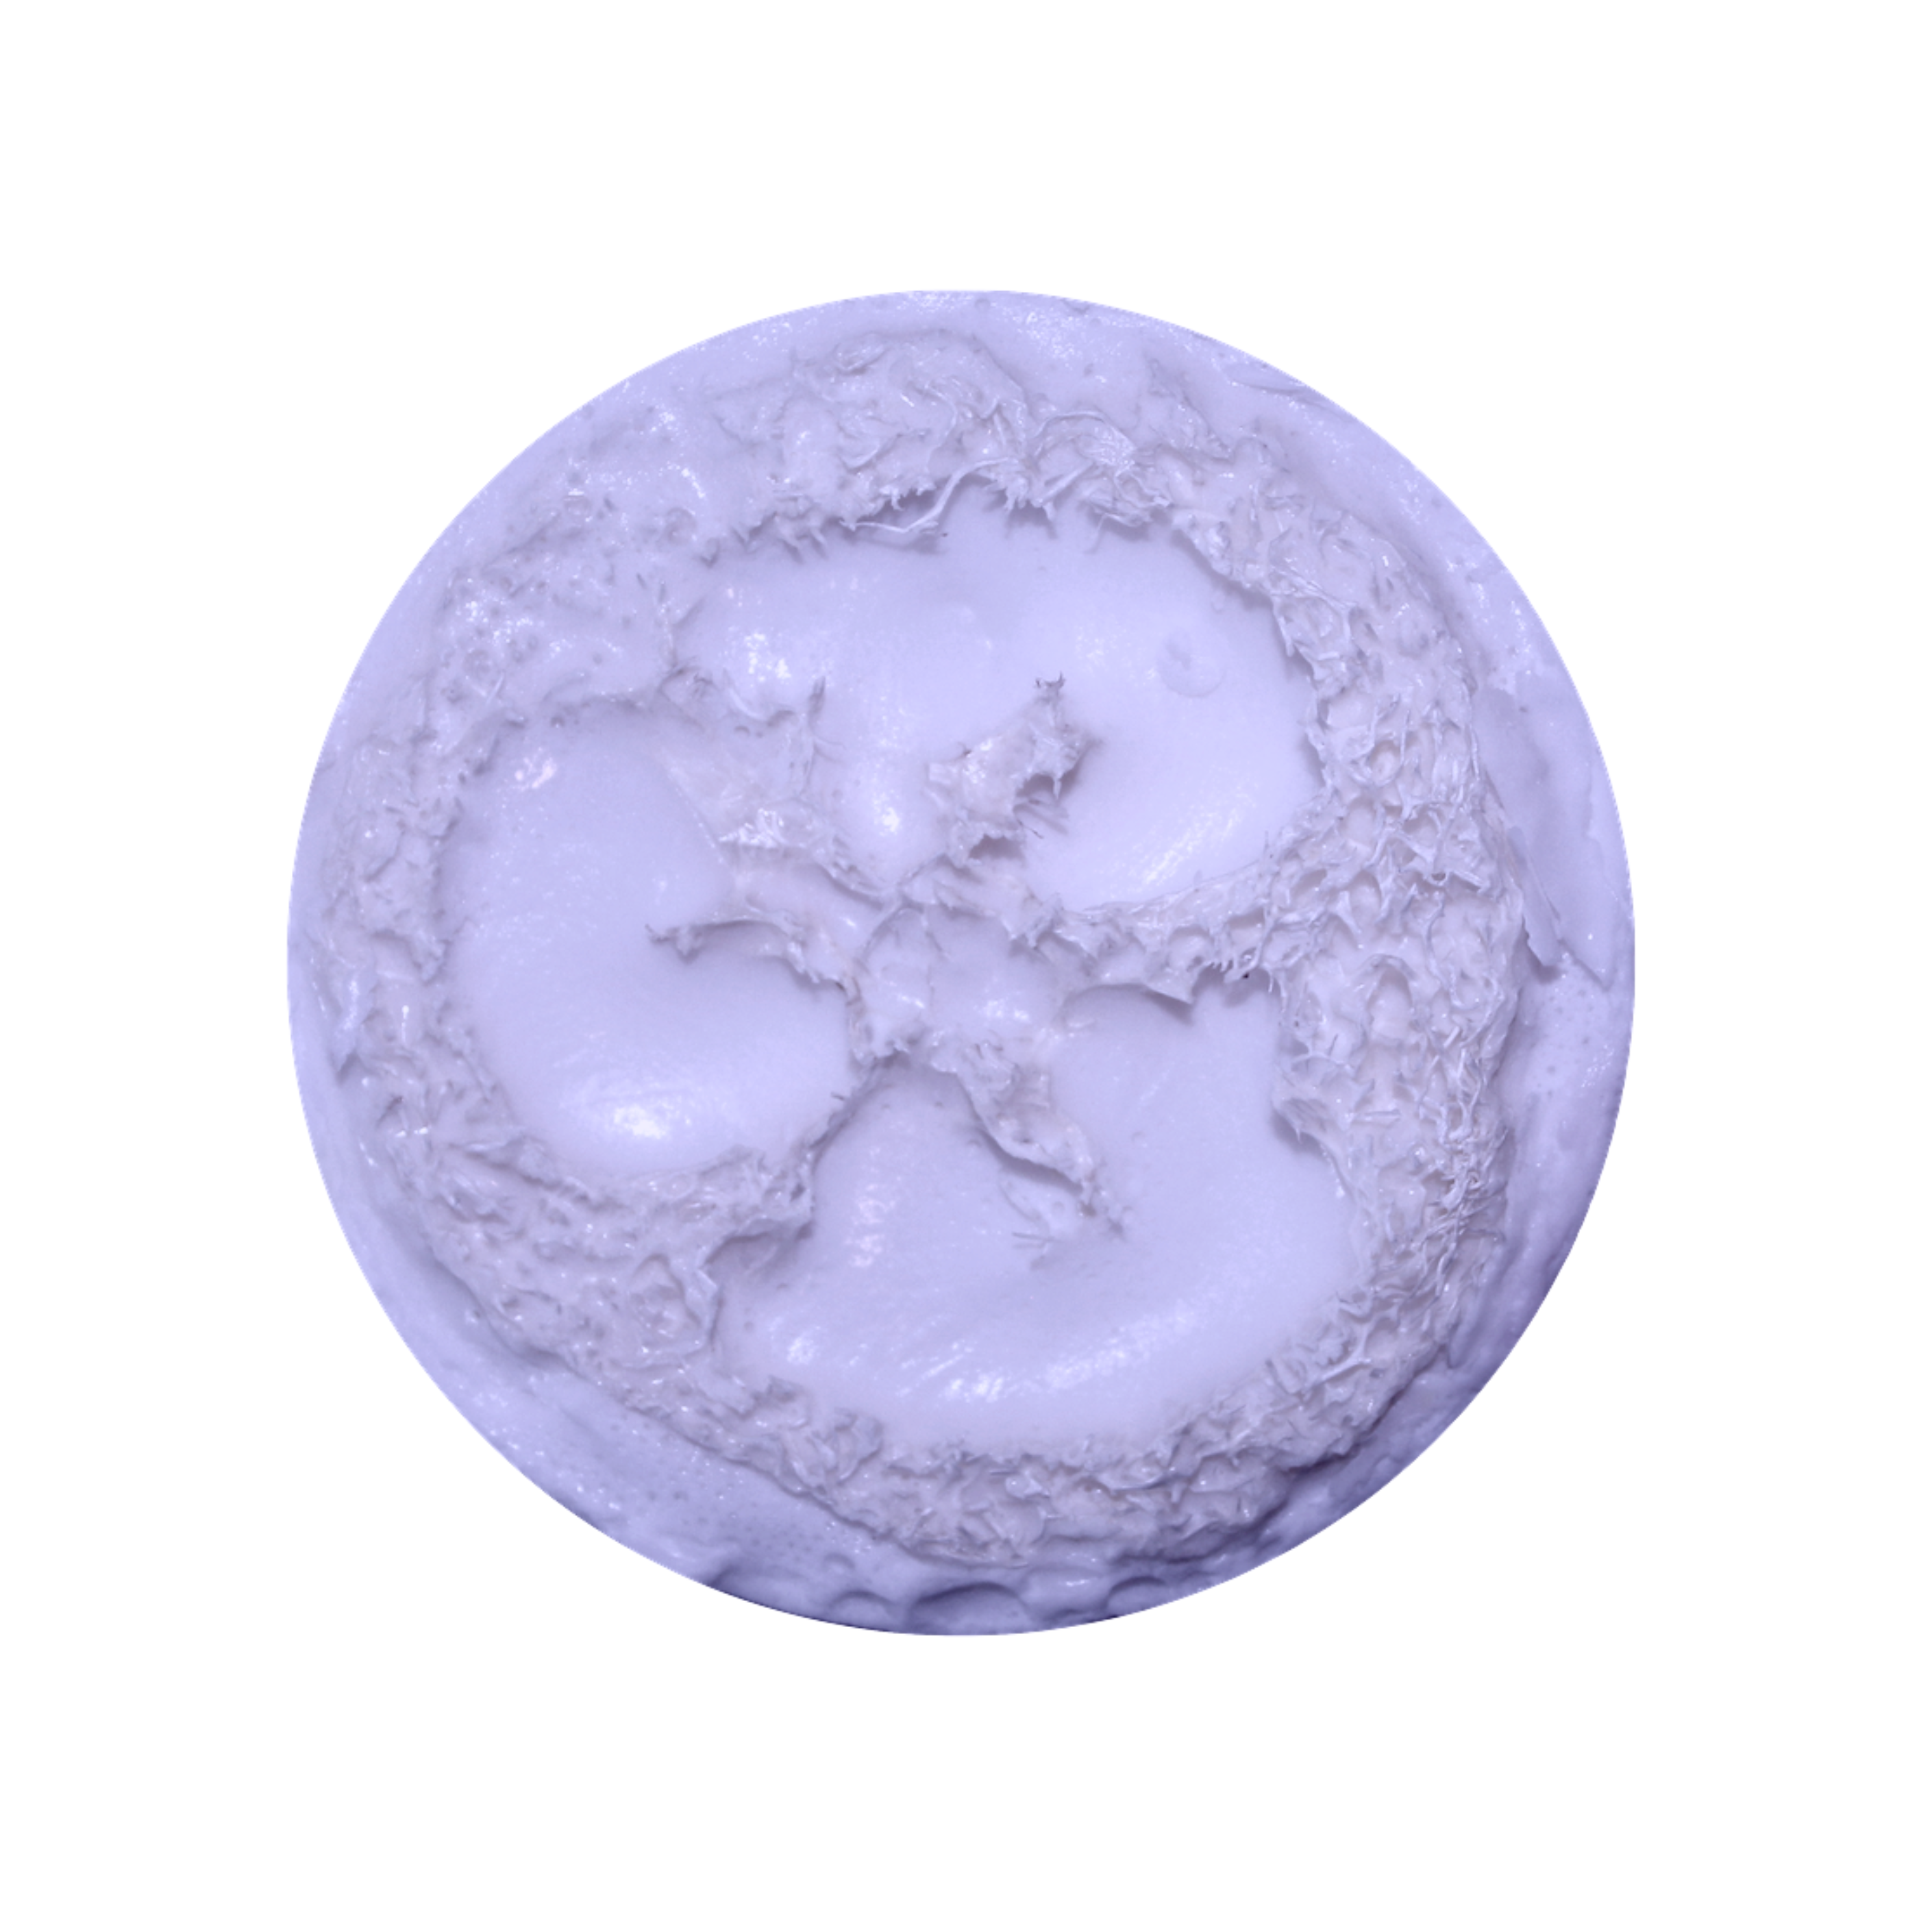 Lavender purple loofah soap is a great sustainable beauty product option for your spa &salon. It made with natural biodegradable loofah with soap, making it a convenient daily exfoliator for dry to normal skin